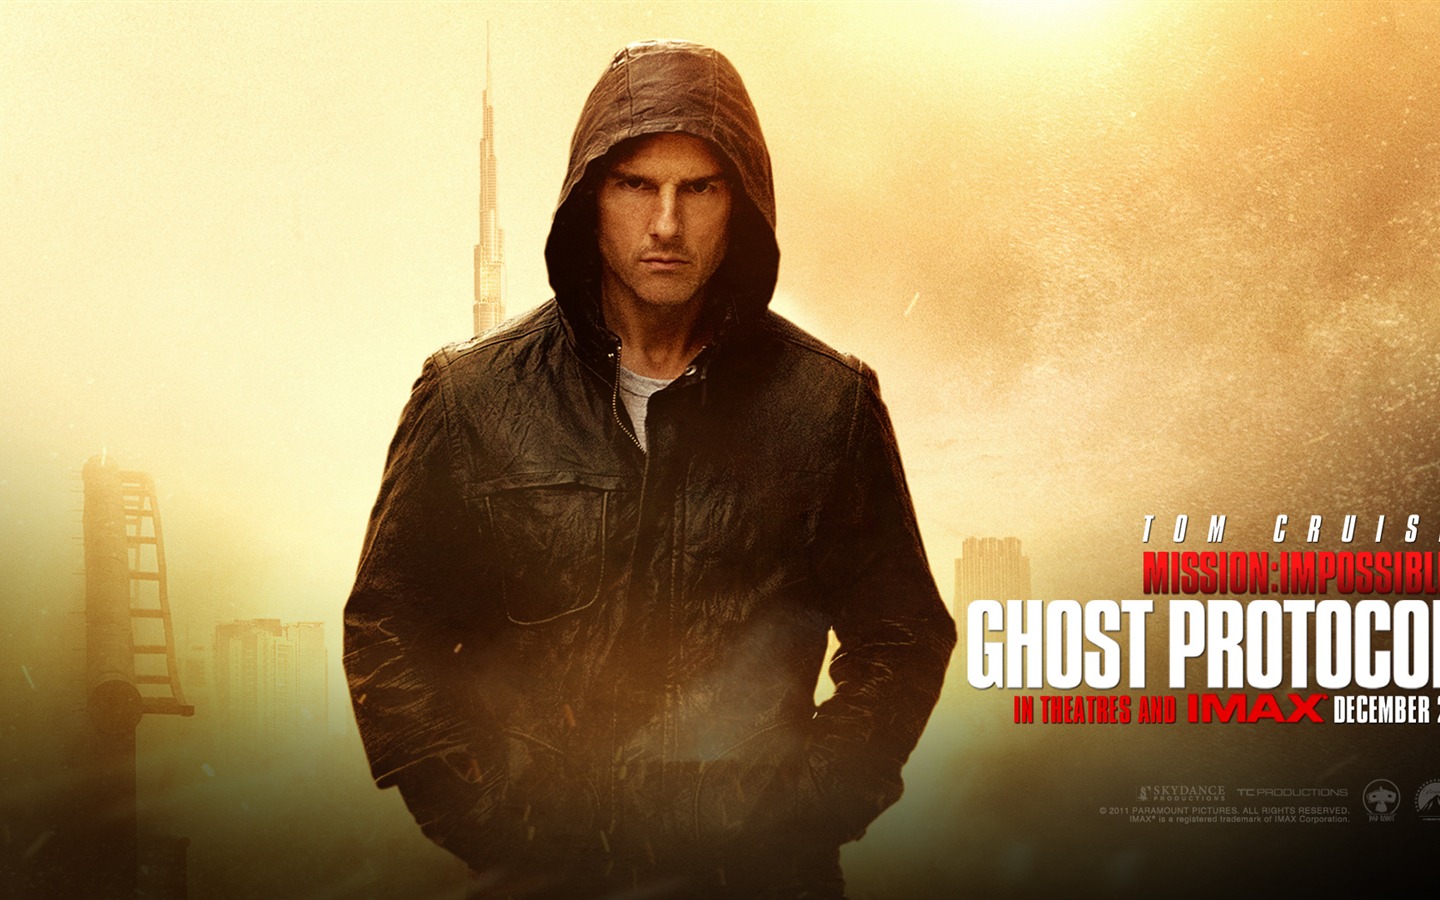 Mission: Impossible - Ghost Protocol 碟中谍4 高清壁纸9 - 1440x900